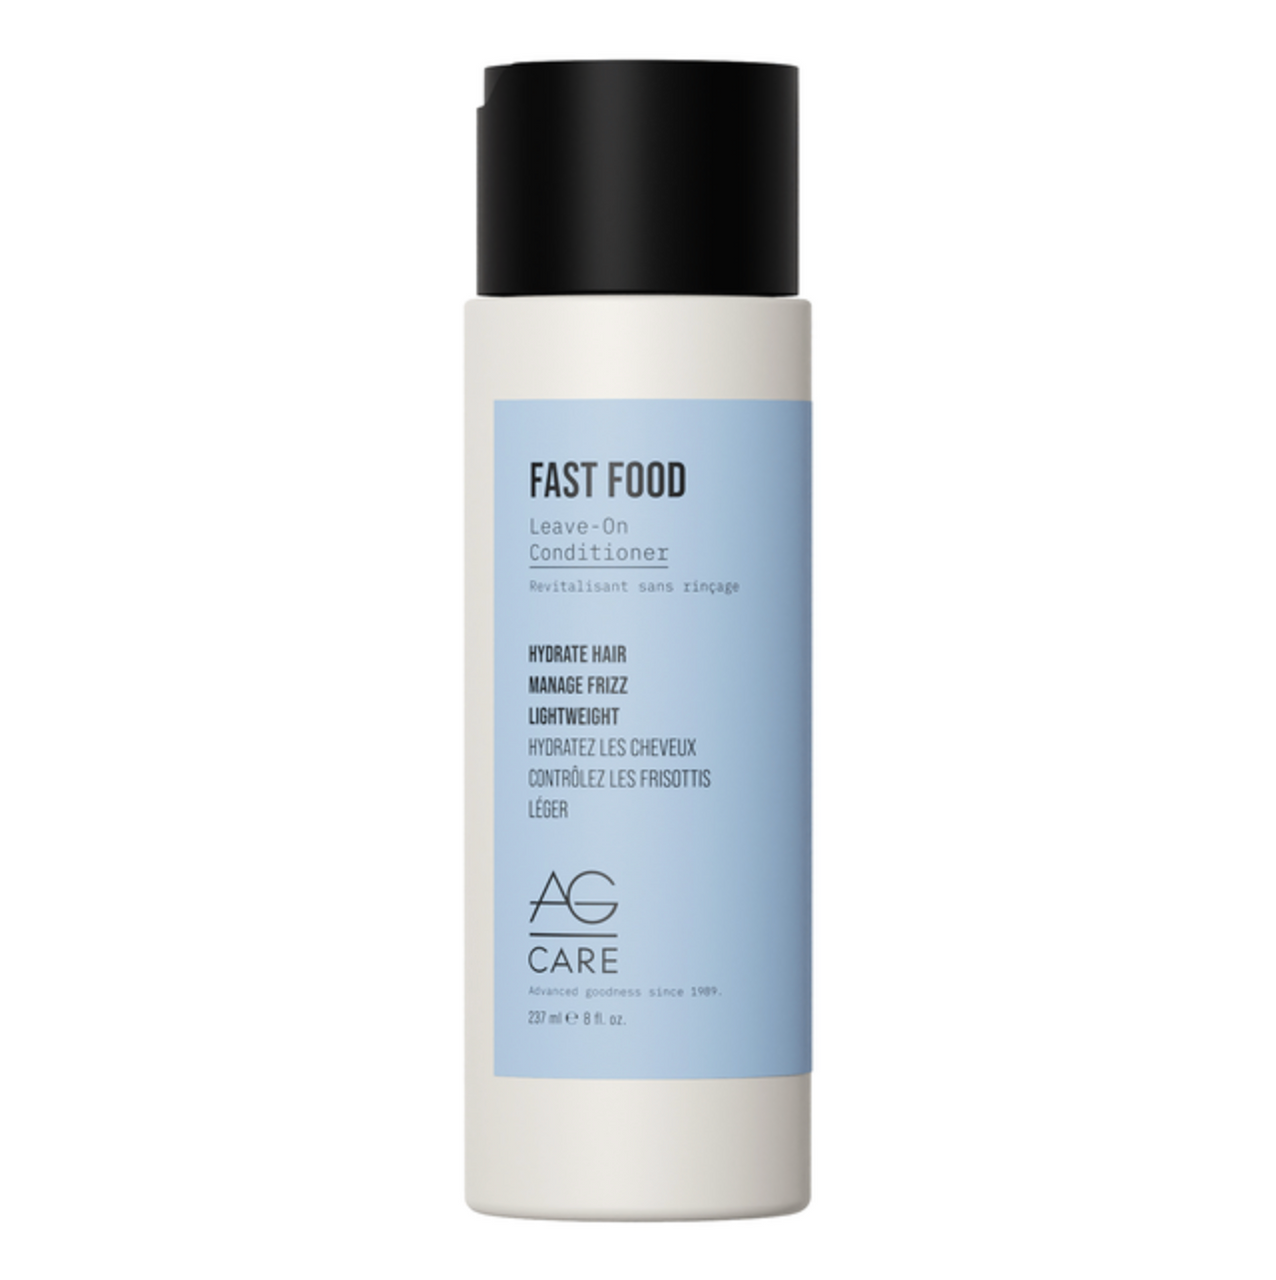 AG Moisture Fast Food Leave-On Conditioner